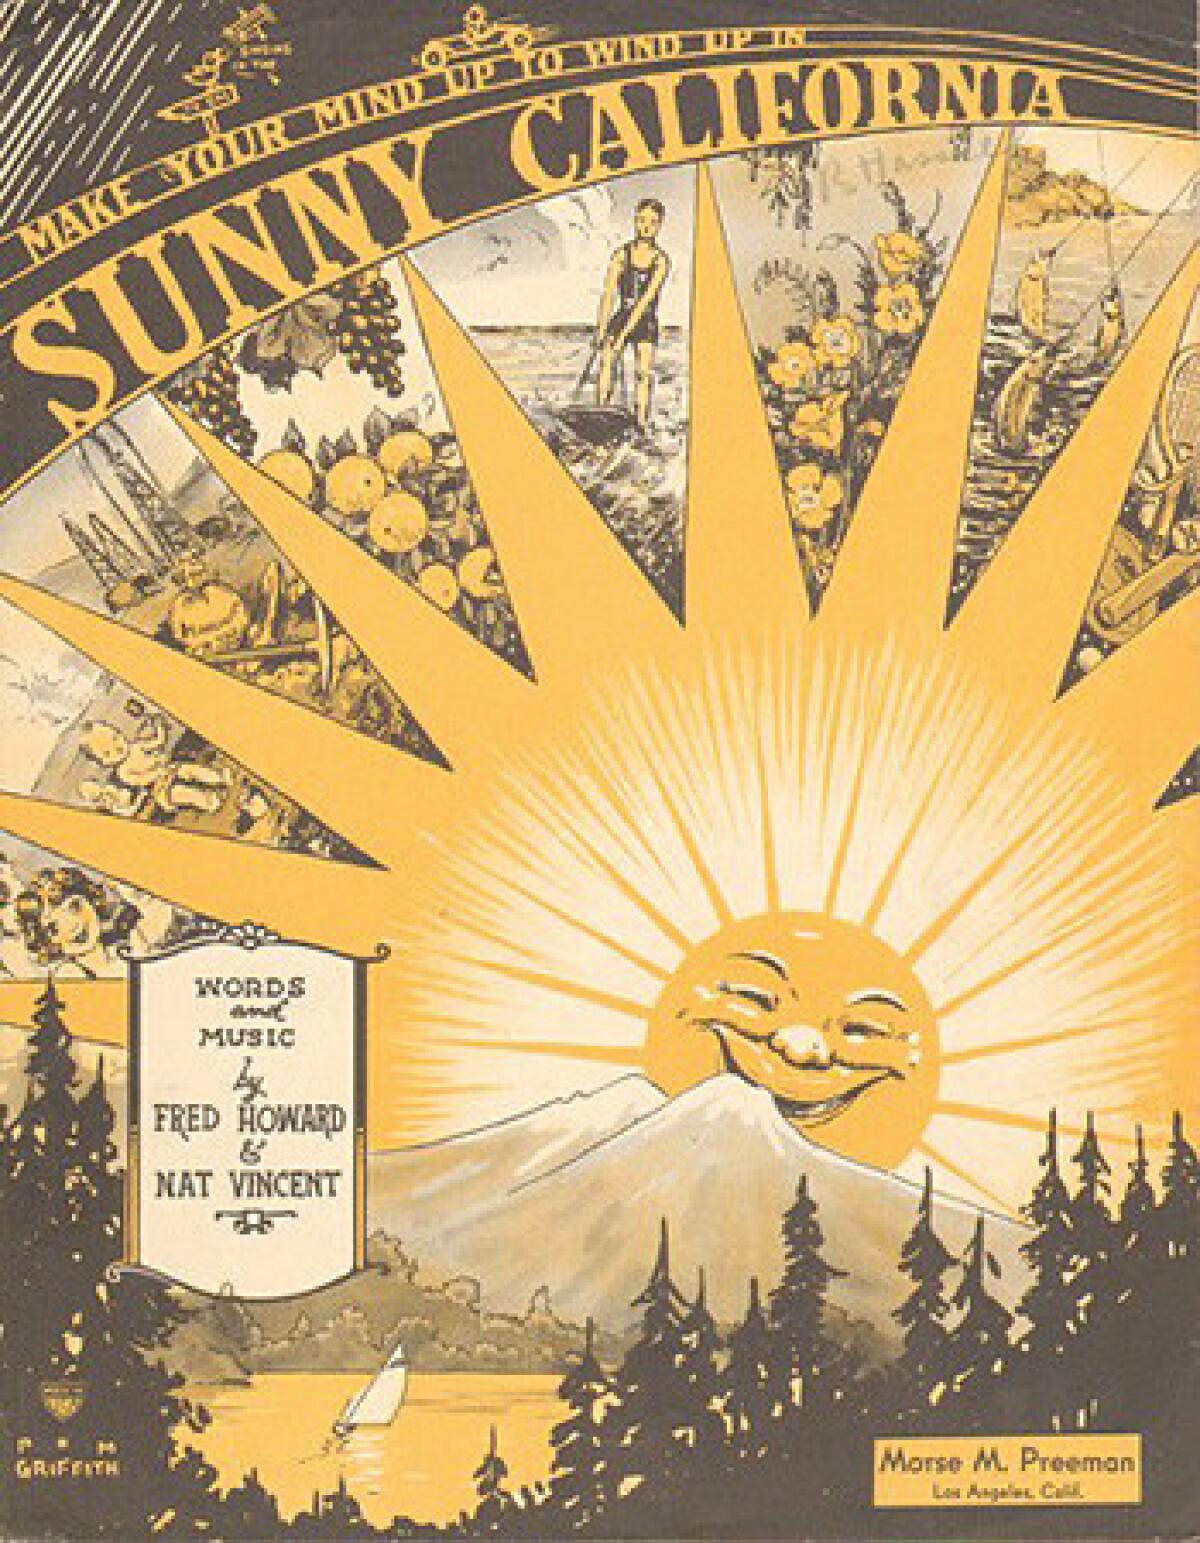 The cover for the sheet music "Make Your Mind Up to Wind Up in California," composed by Fred Howard and Nat Vincent.